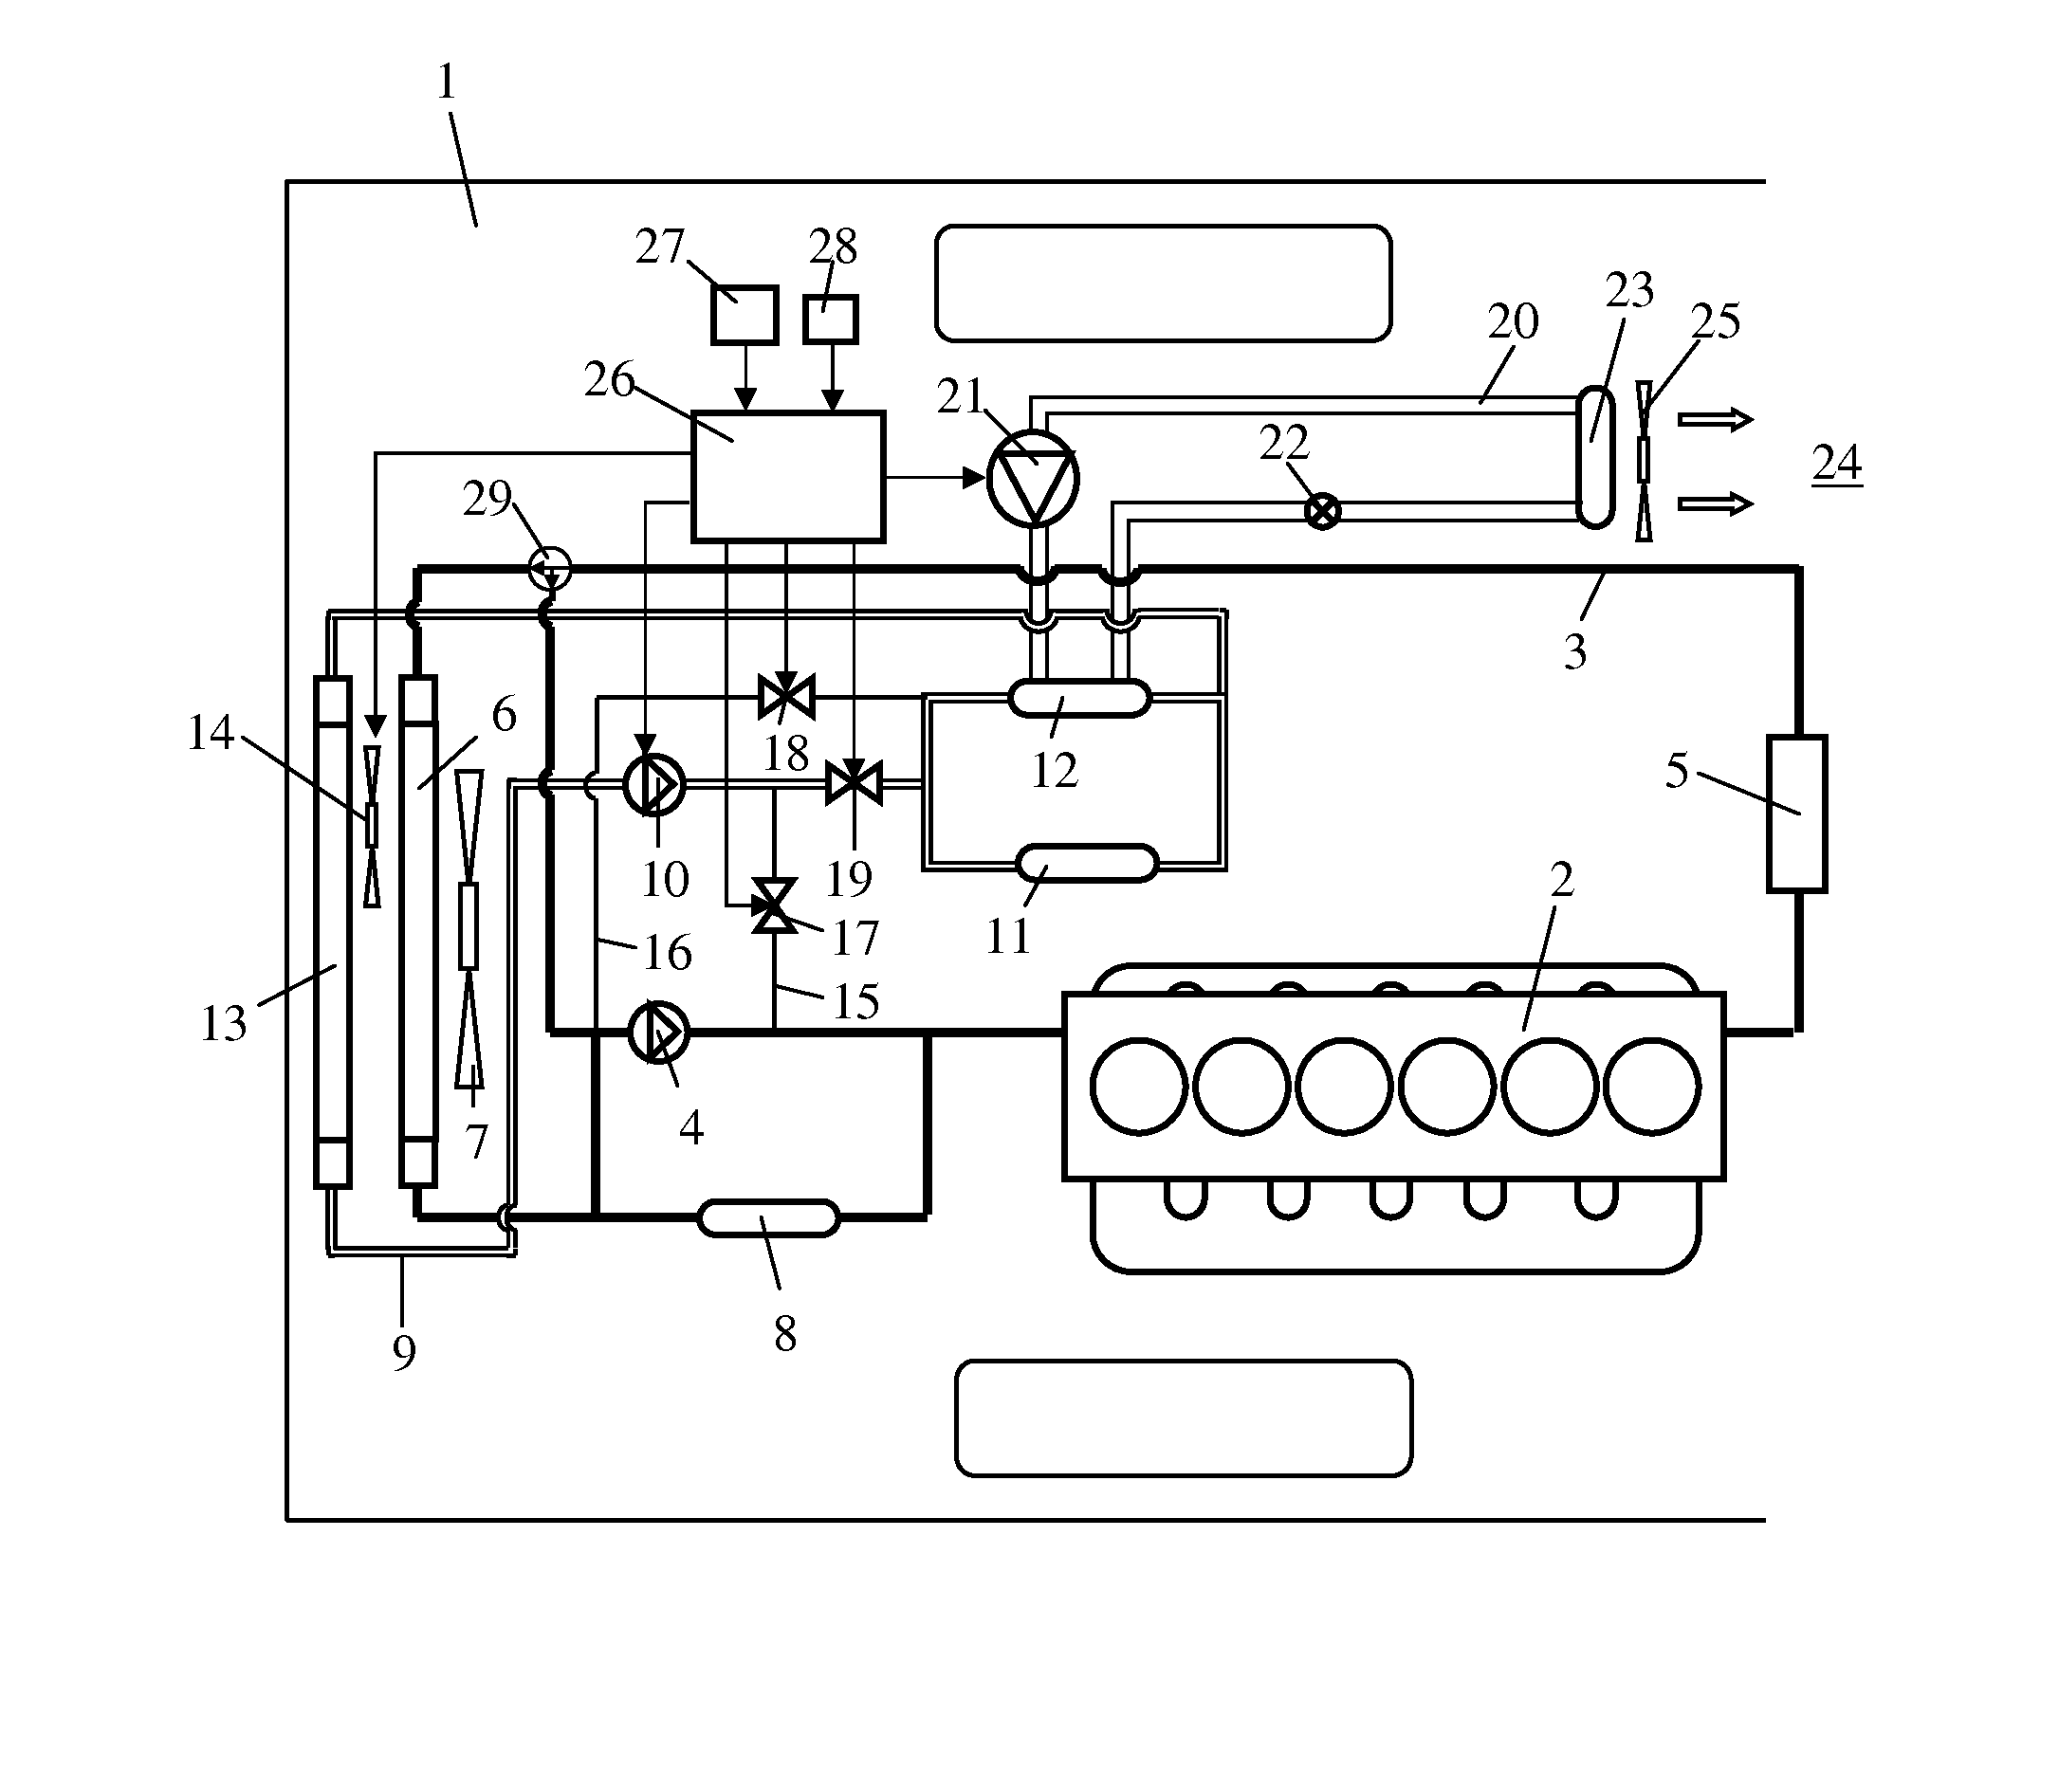 Radiator arrangement in a vehicle powered by a combustion engine